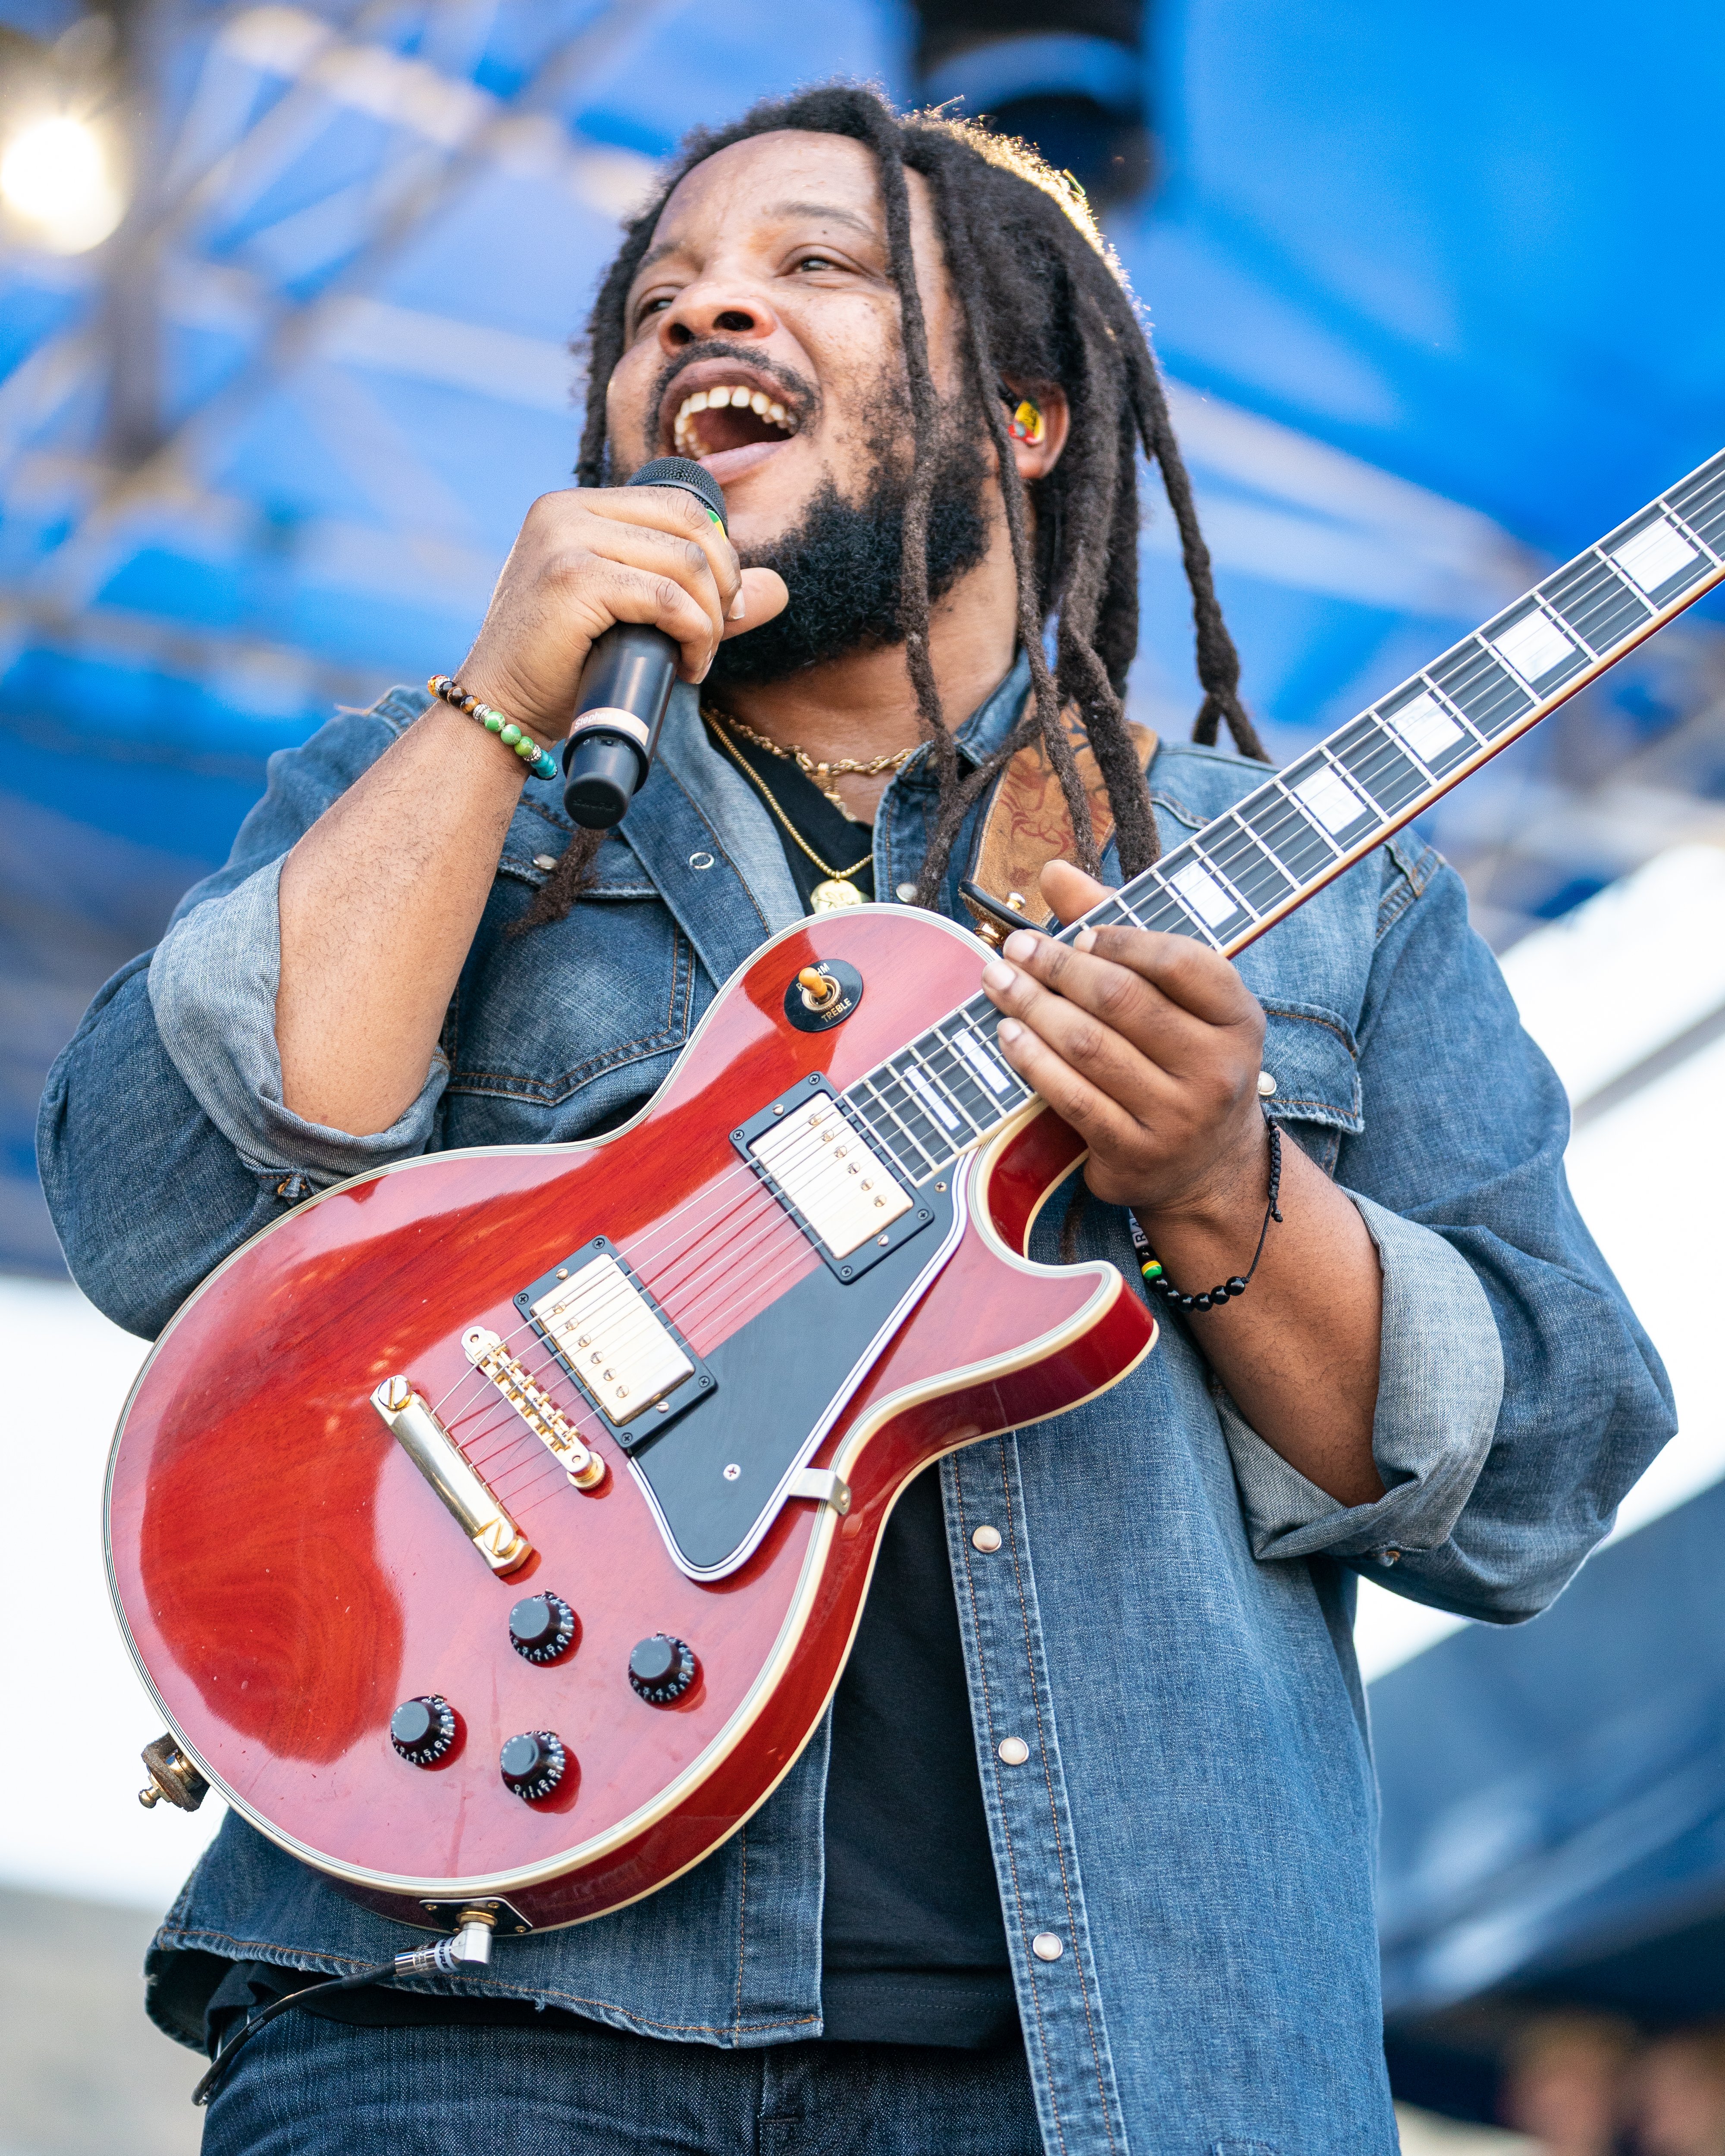 Stephen Marley at the 60th annual Newport Folk Festival 2019 on July 28, 2019 | Source: Getty Images